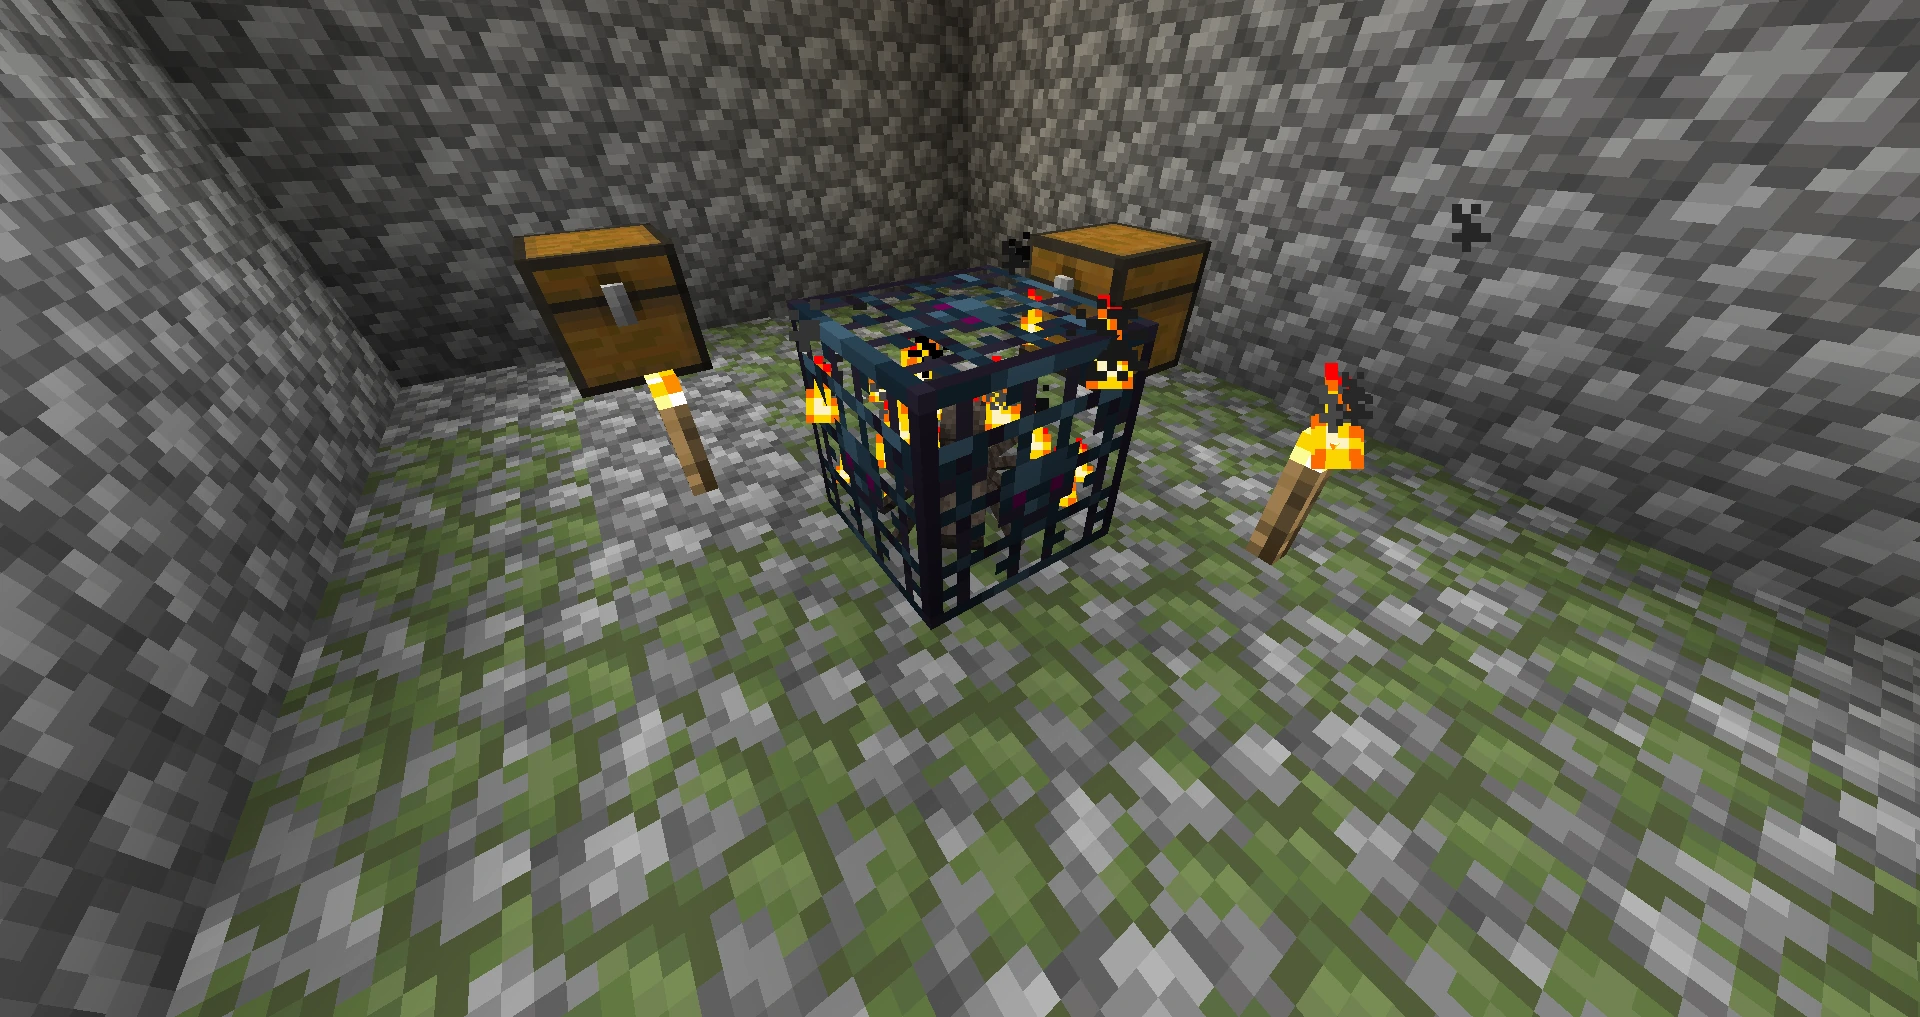 The Ins and Outs of Spawners